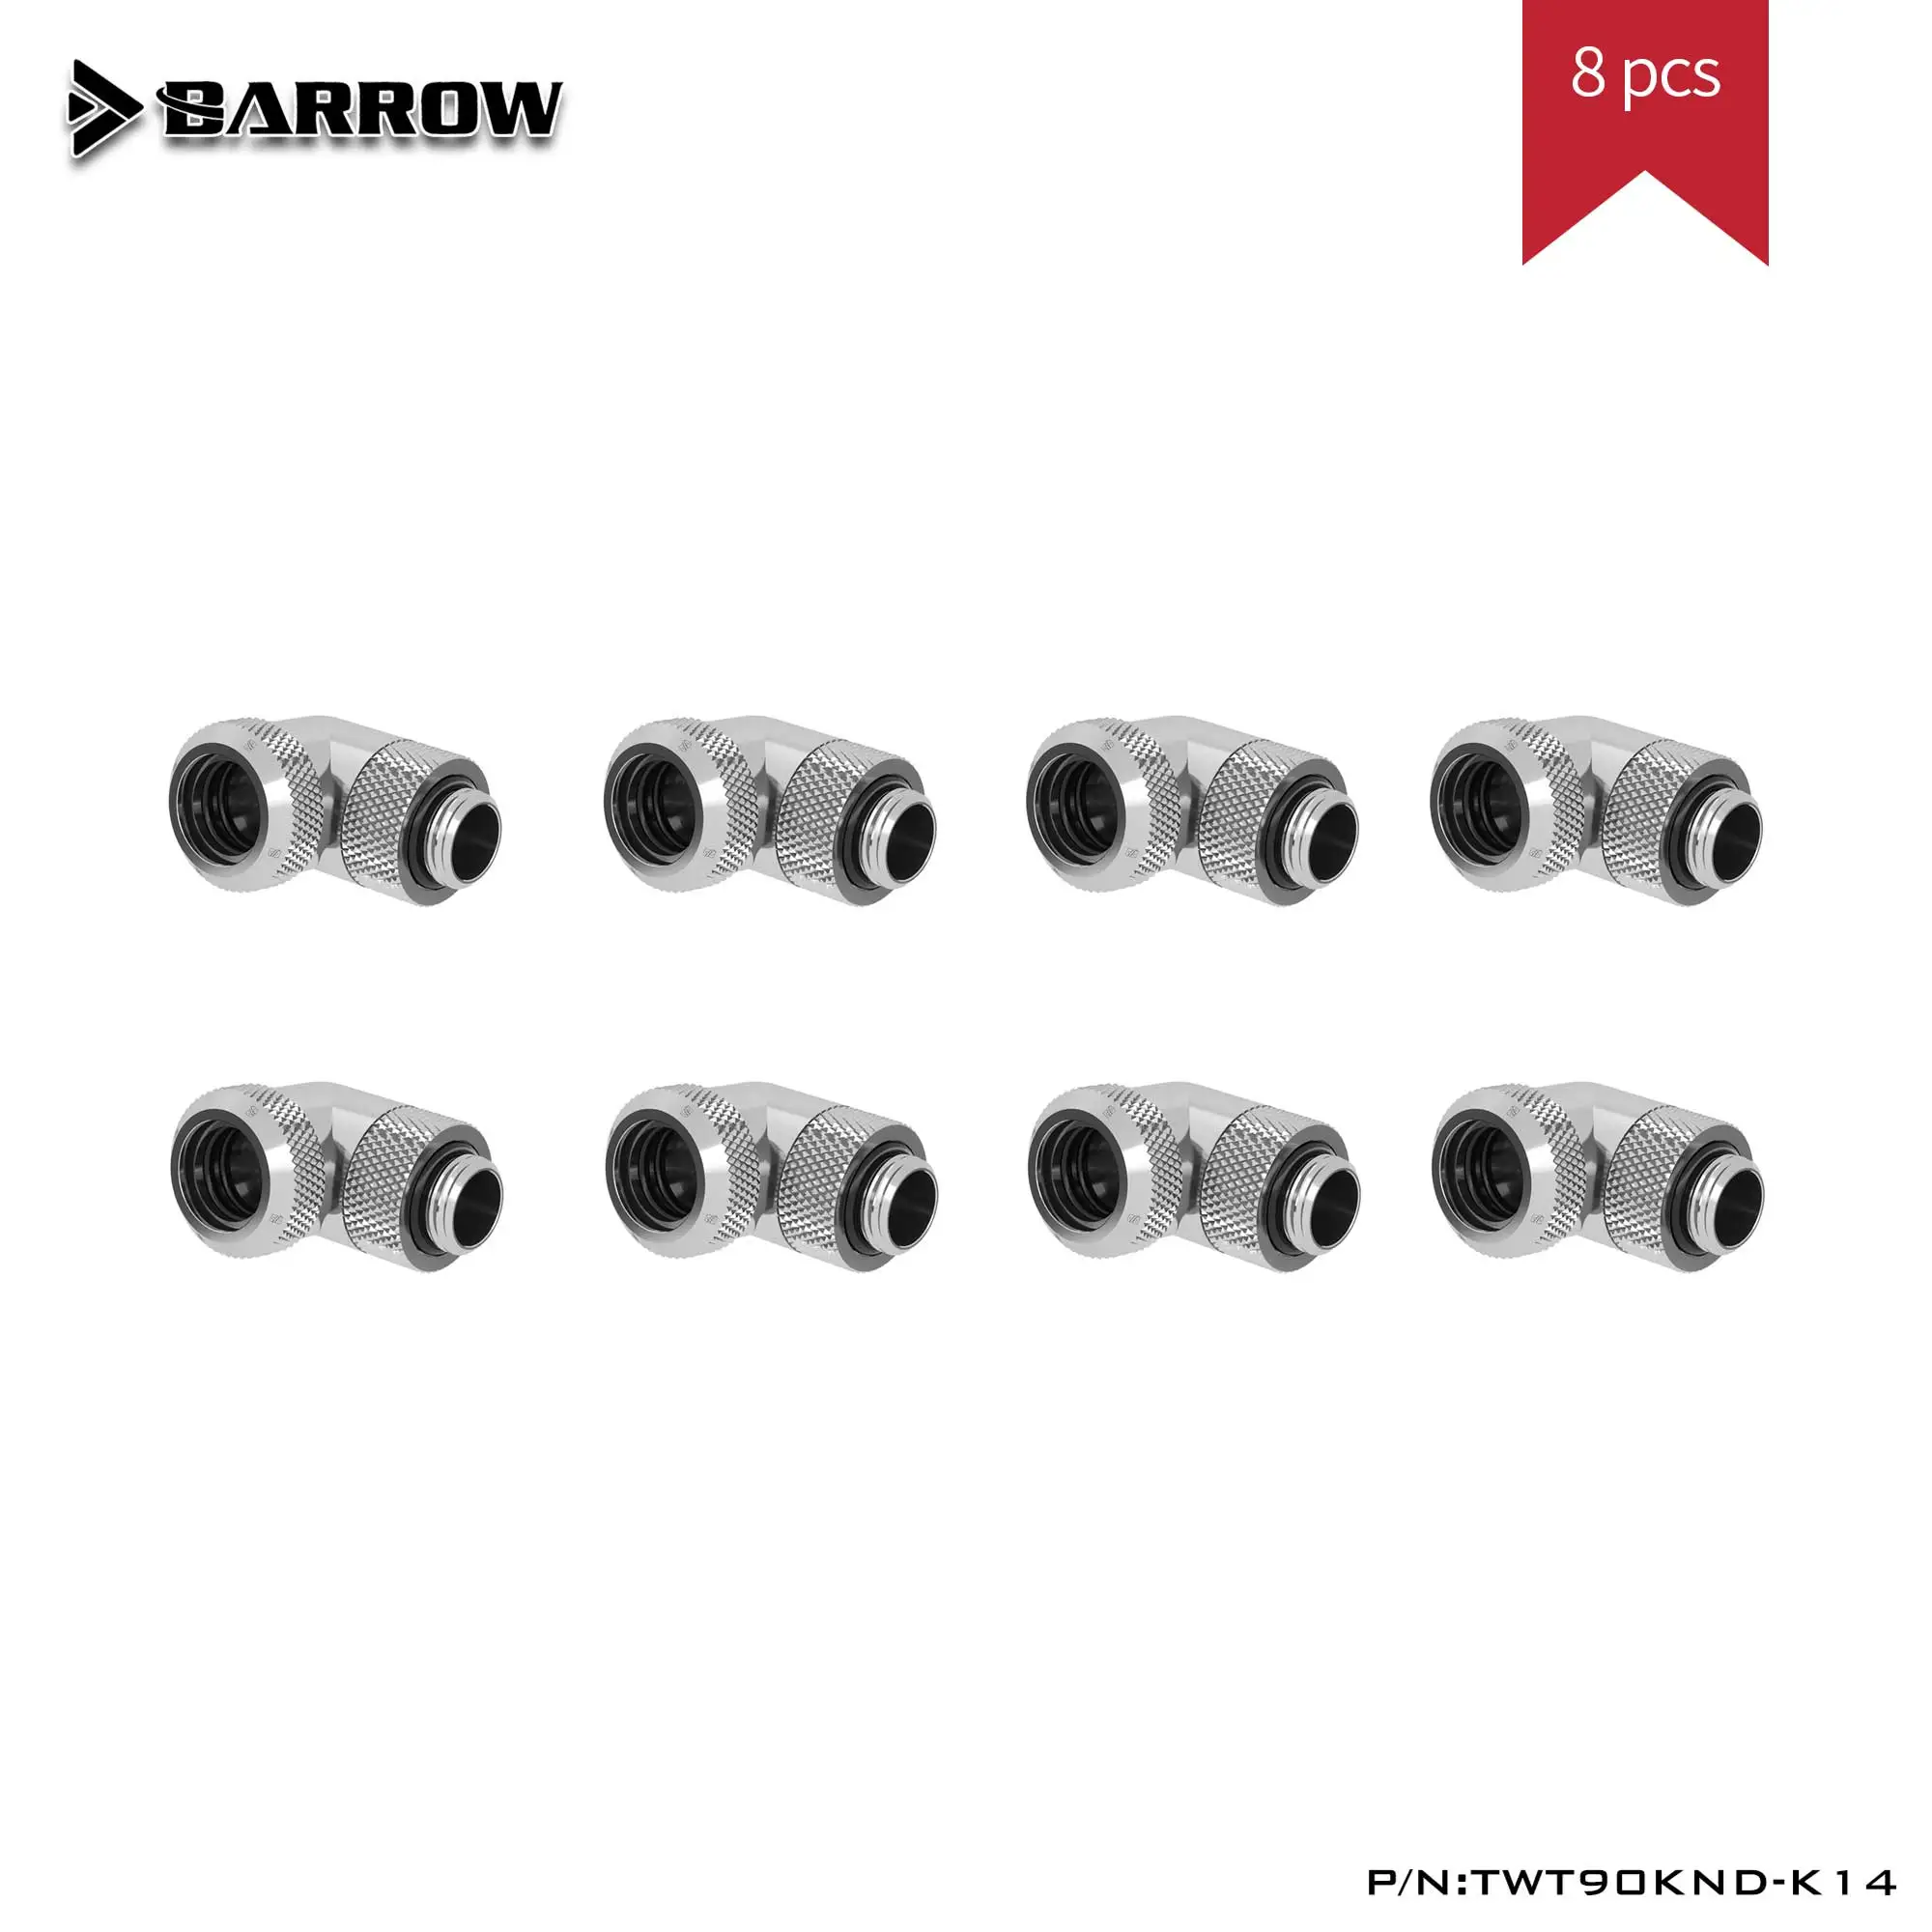 Barrow TWT90KND-K14 8PCS 90 Degree Hard Tube Fitting Water System For PC Cooling Pipes Modding DIY Gold/Black/White/Silver